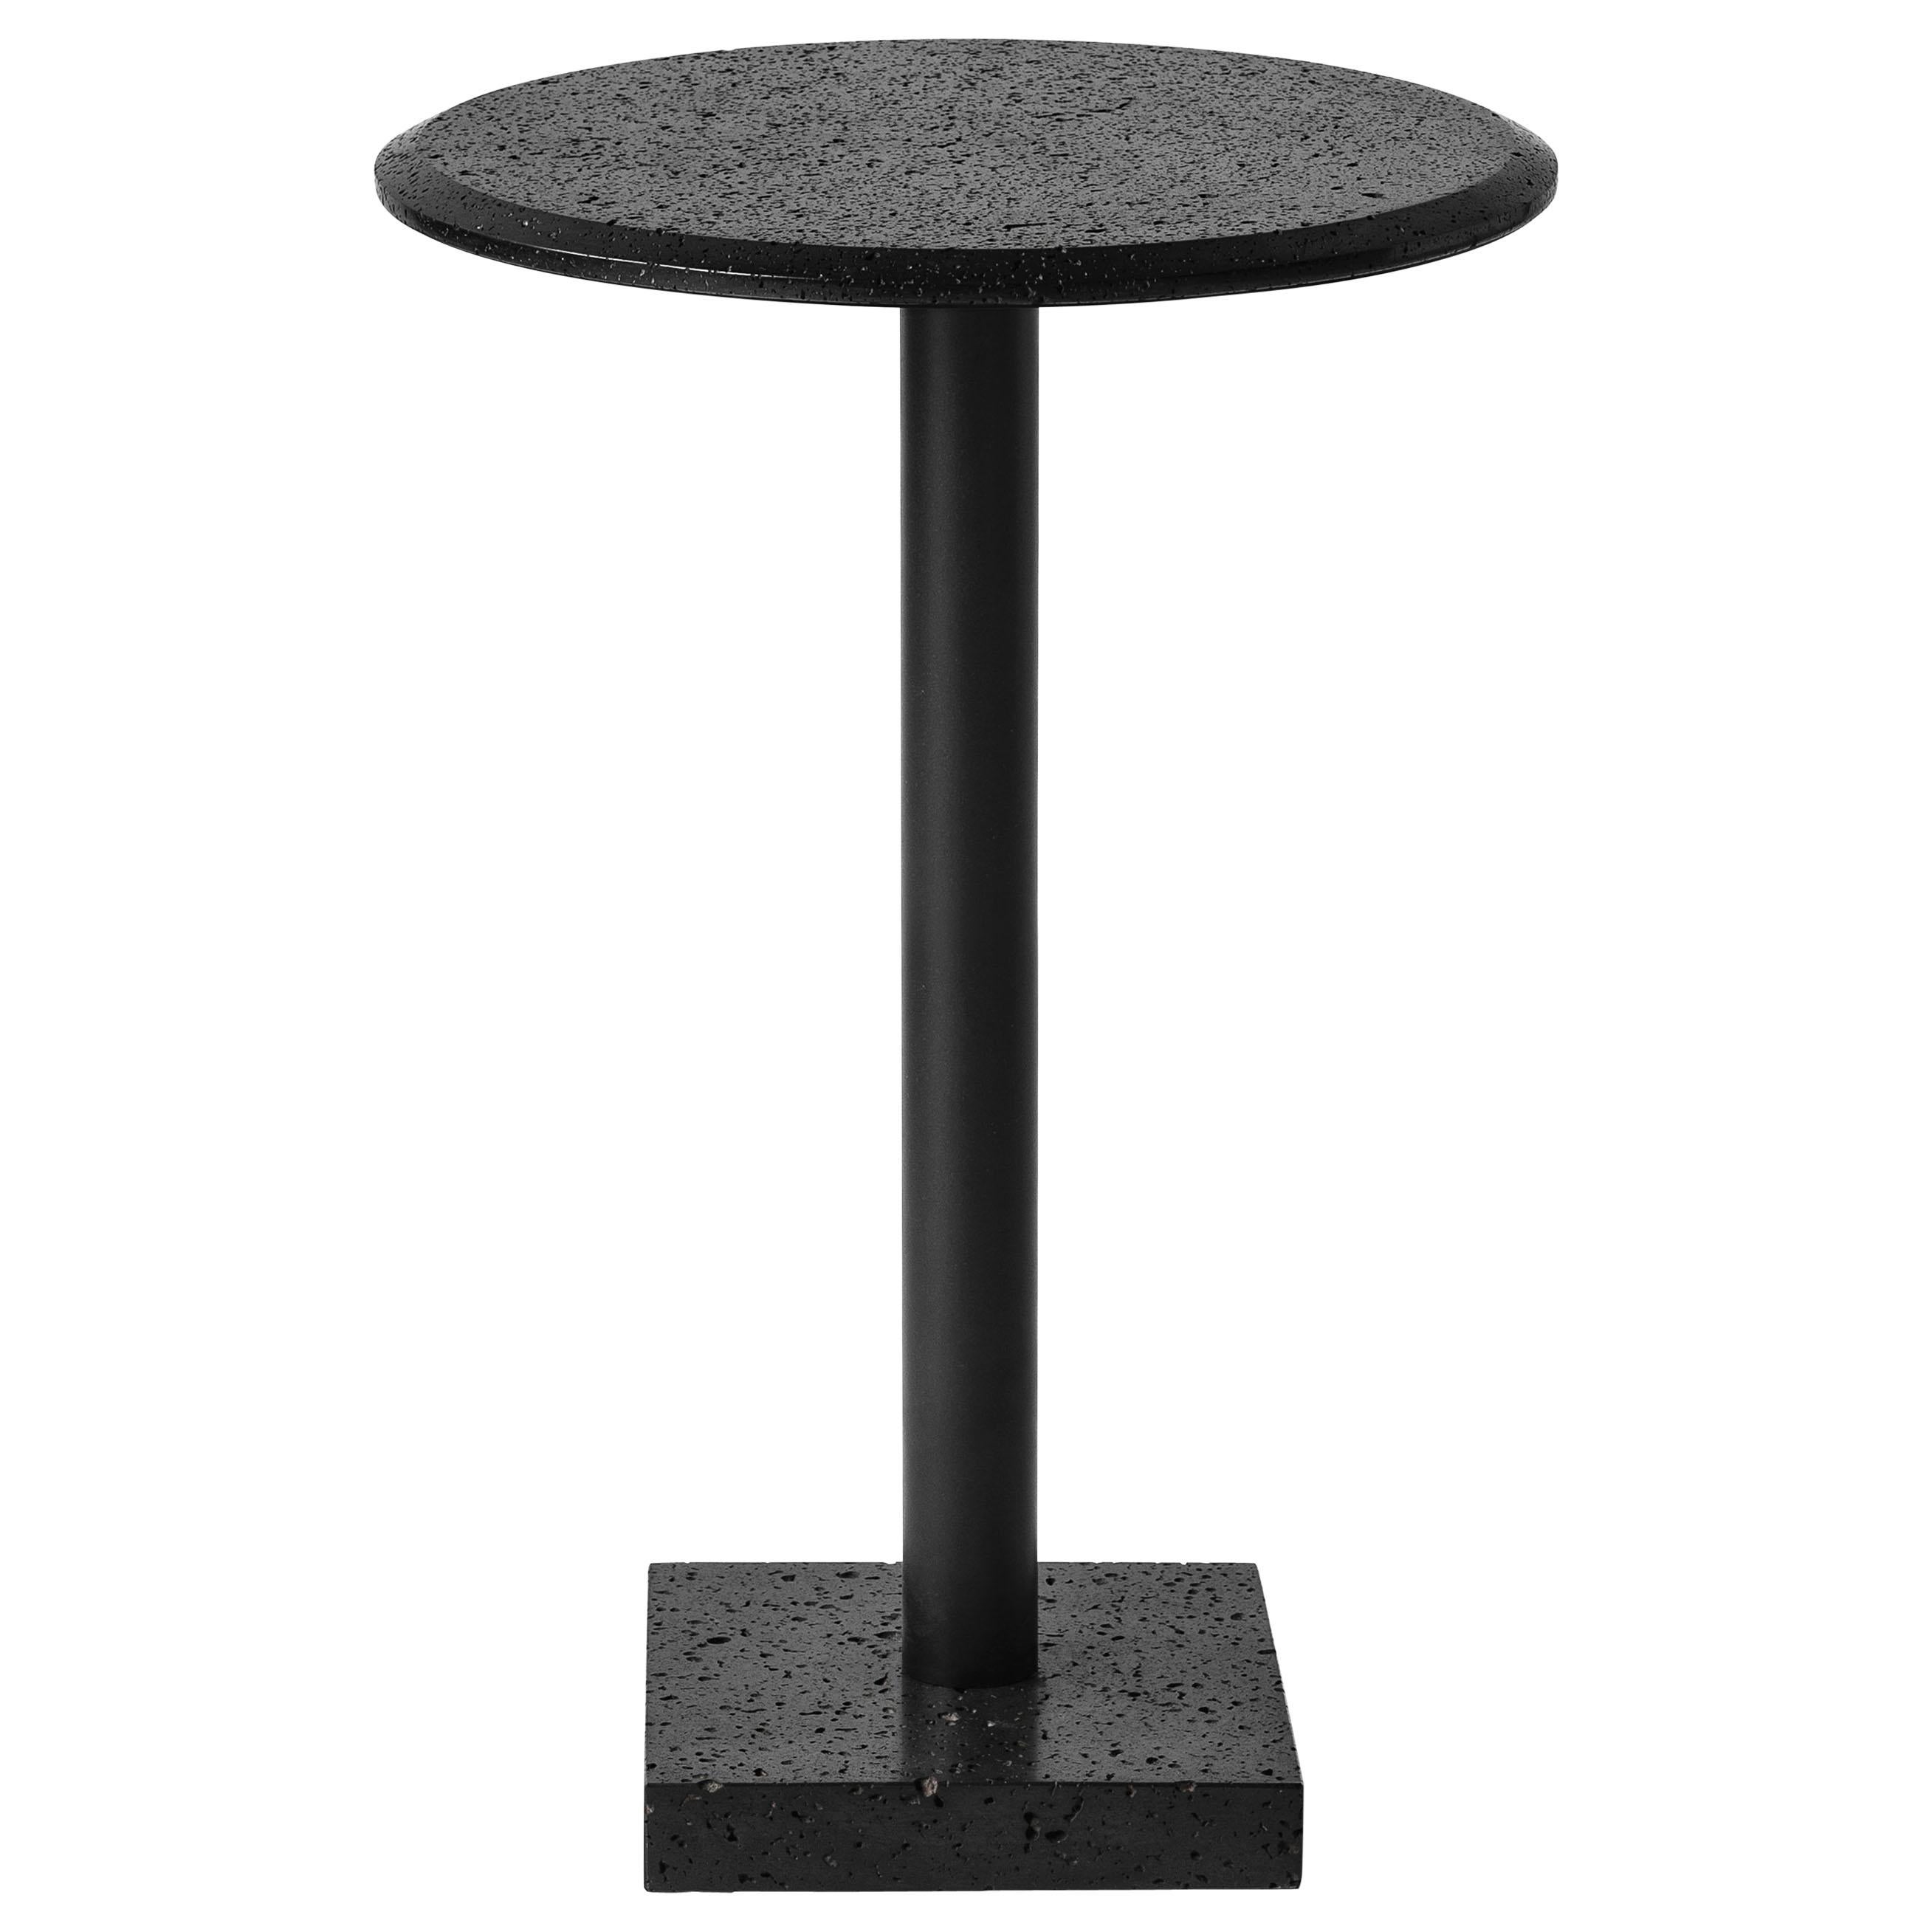 Lava Stone Dinning Table, “Right, ” Round Table Top by Buzao